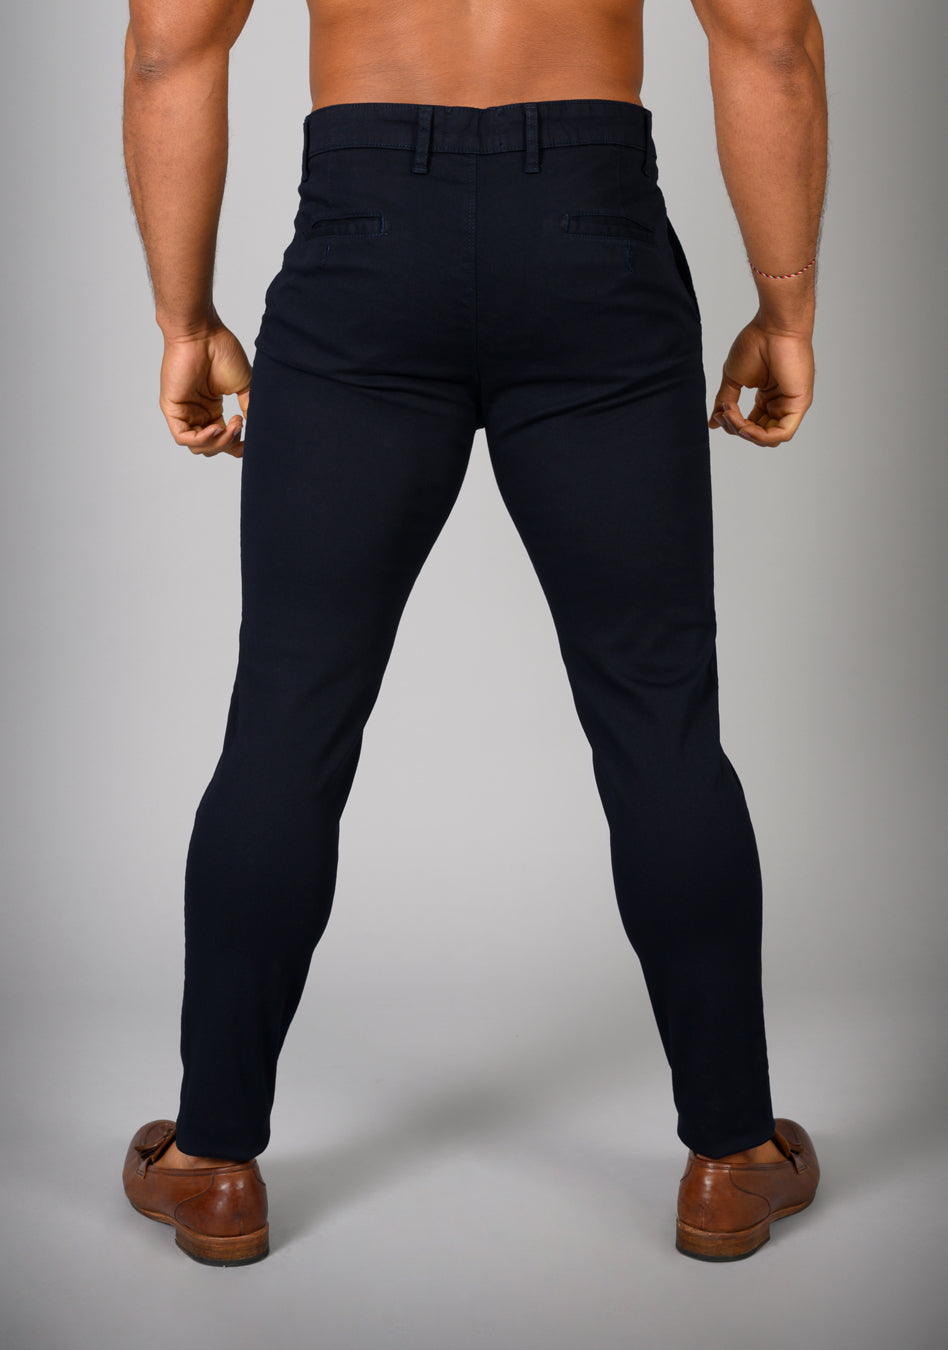 Oxcloth Dark Blue muscle fit chinos offering a perfect blend of comfort and style for well-built physiques, with a contoured waist and athletic fit design for an on-trend appearance.